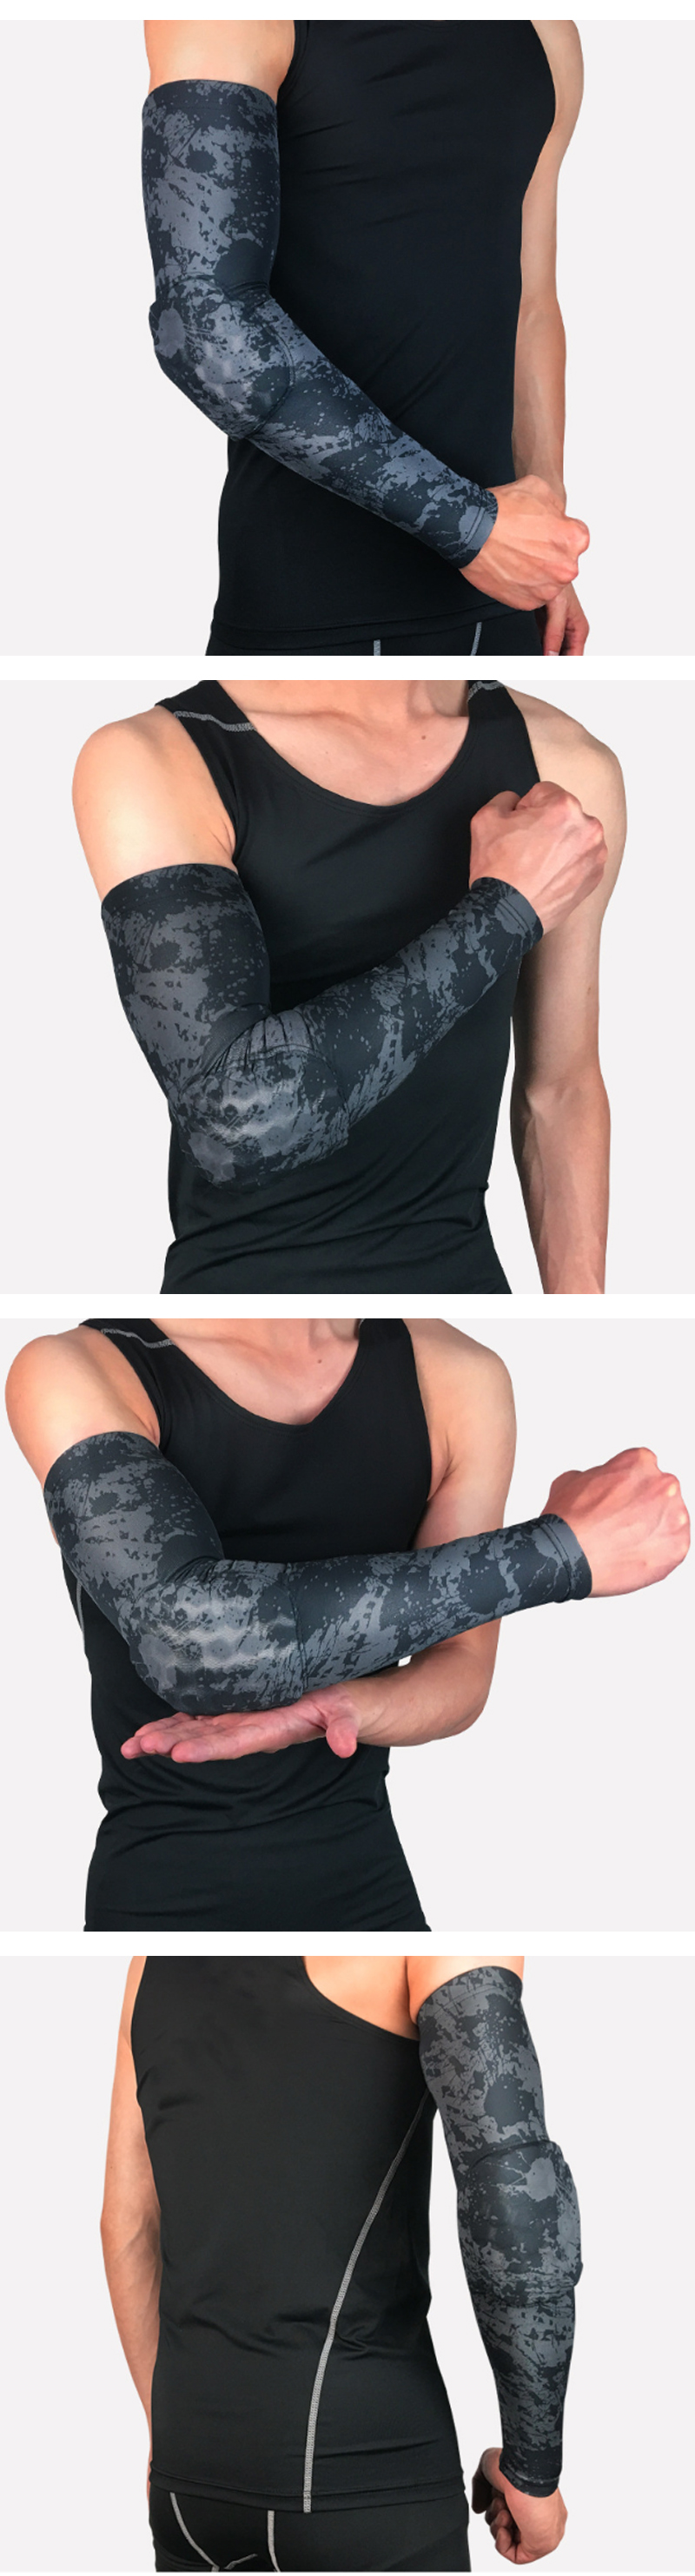 KALOAD-1-PC-Arm-Sleeve-Elbow-Support-Breathable-Outdoor-Sport-Exercise-Fitness-Elbow-Protective-Gear-1398534-2